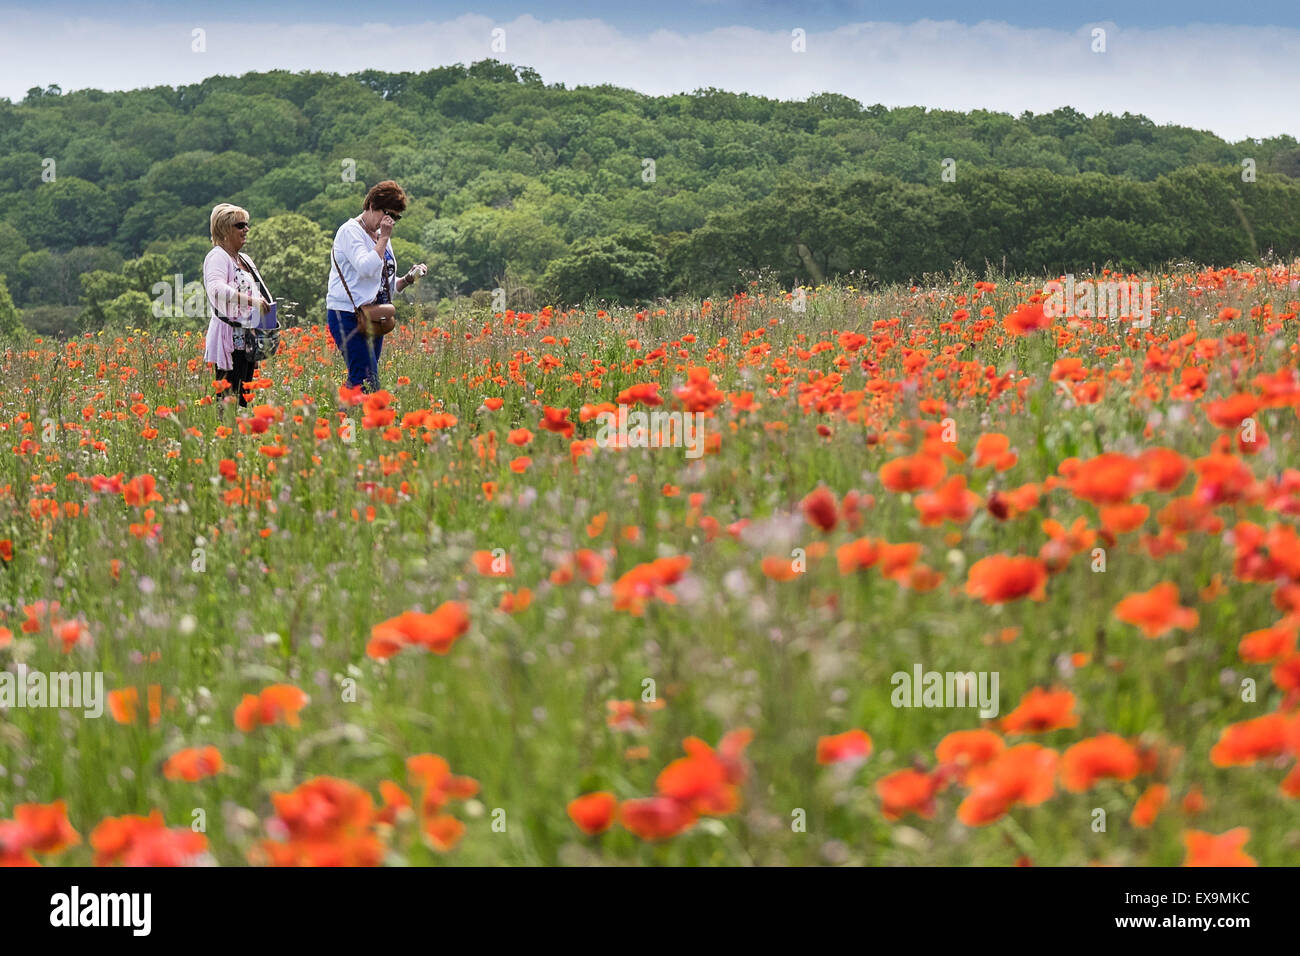 Tourists walkingn through a field of poppies in the Lost Gardens of Heligan in Cornwall. Stock Photo